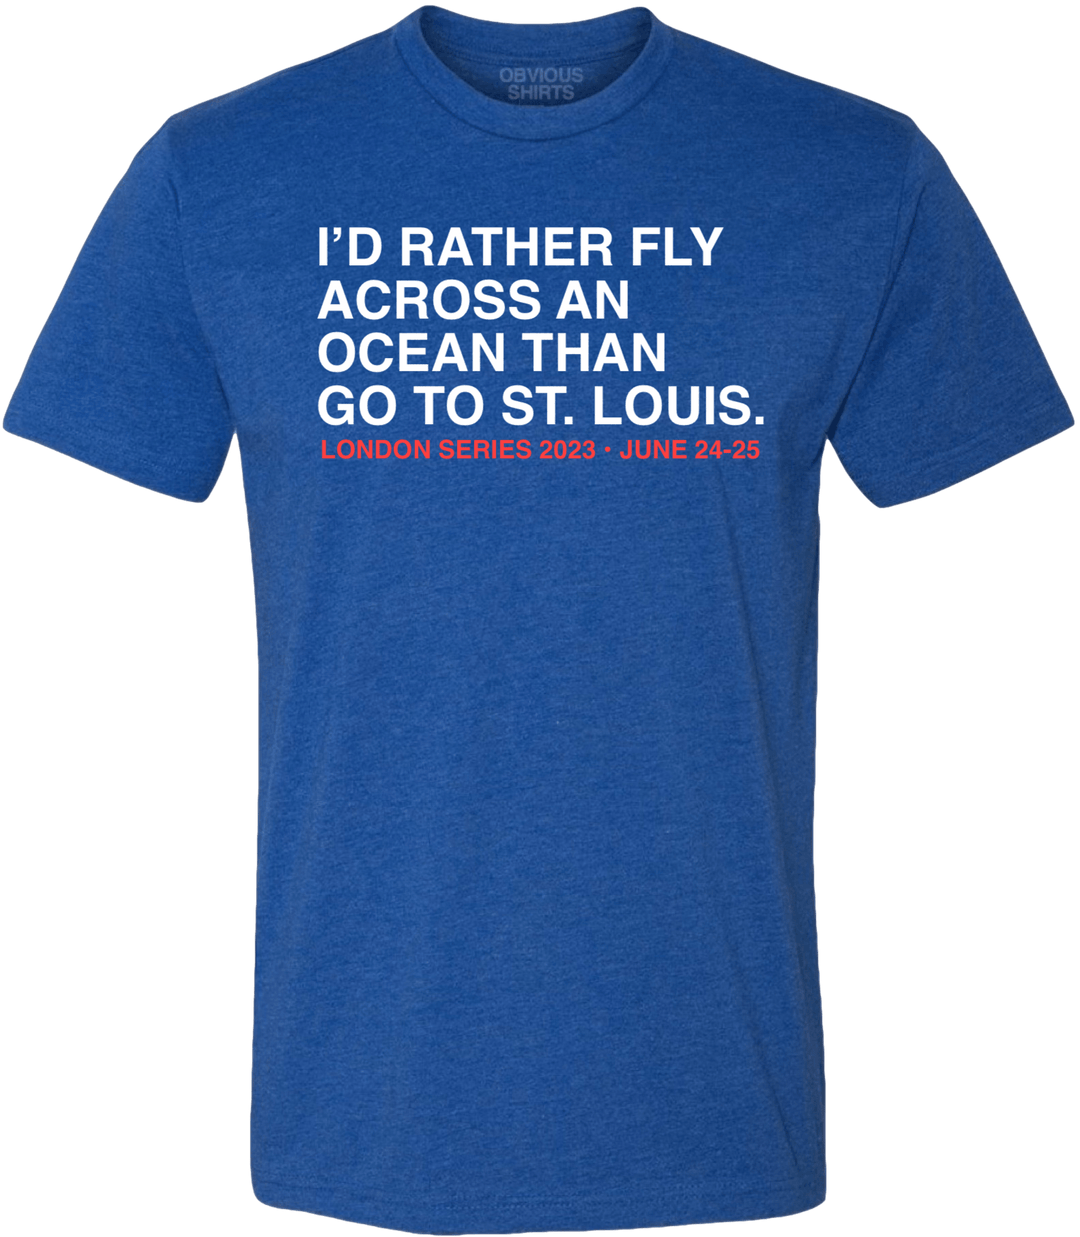 I'D RATHER FLY ACROSS AN OCEAN THAN GO TO ST. LOUIS. - OBVIOUS SHIRTS